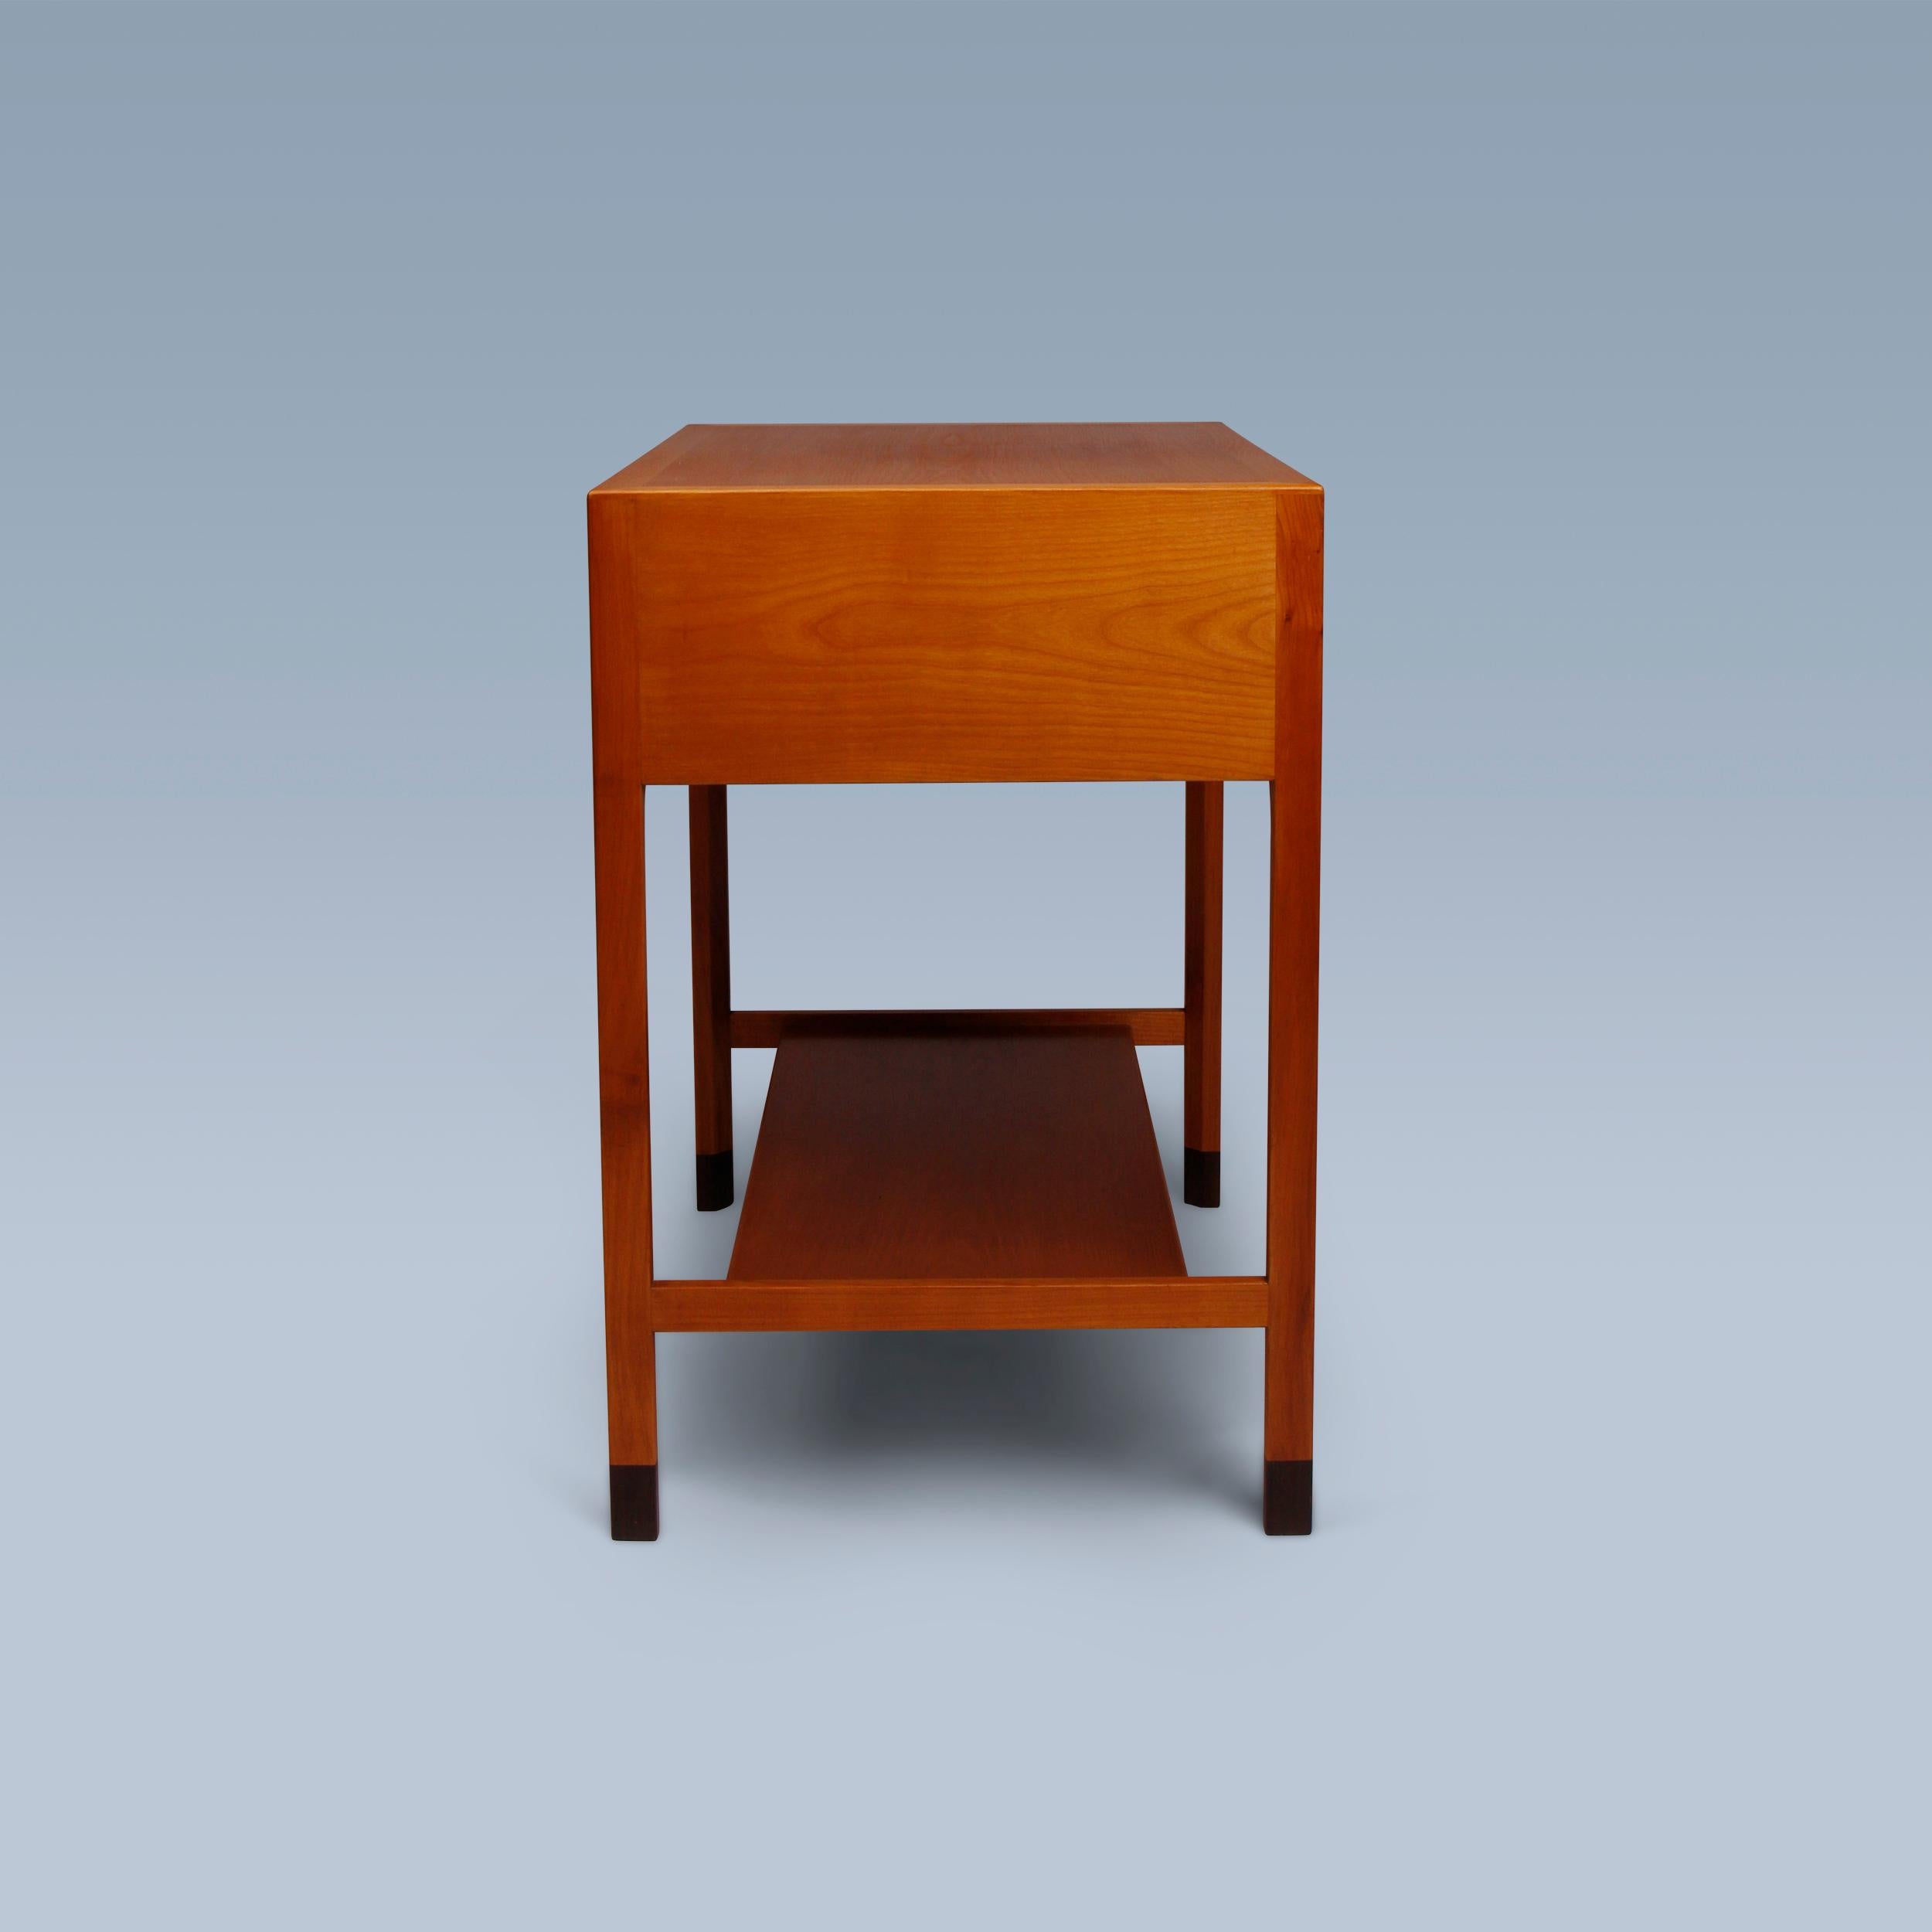 Cherry Danish modern cherry wood side table with drawers and shelf For Sale